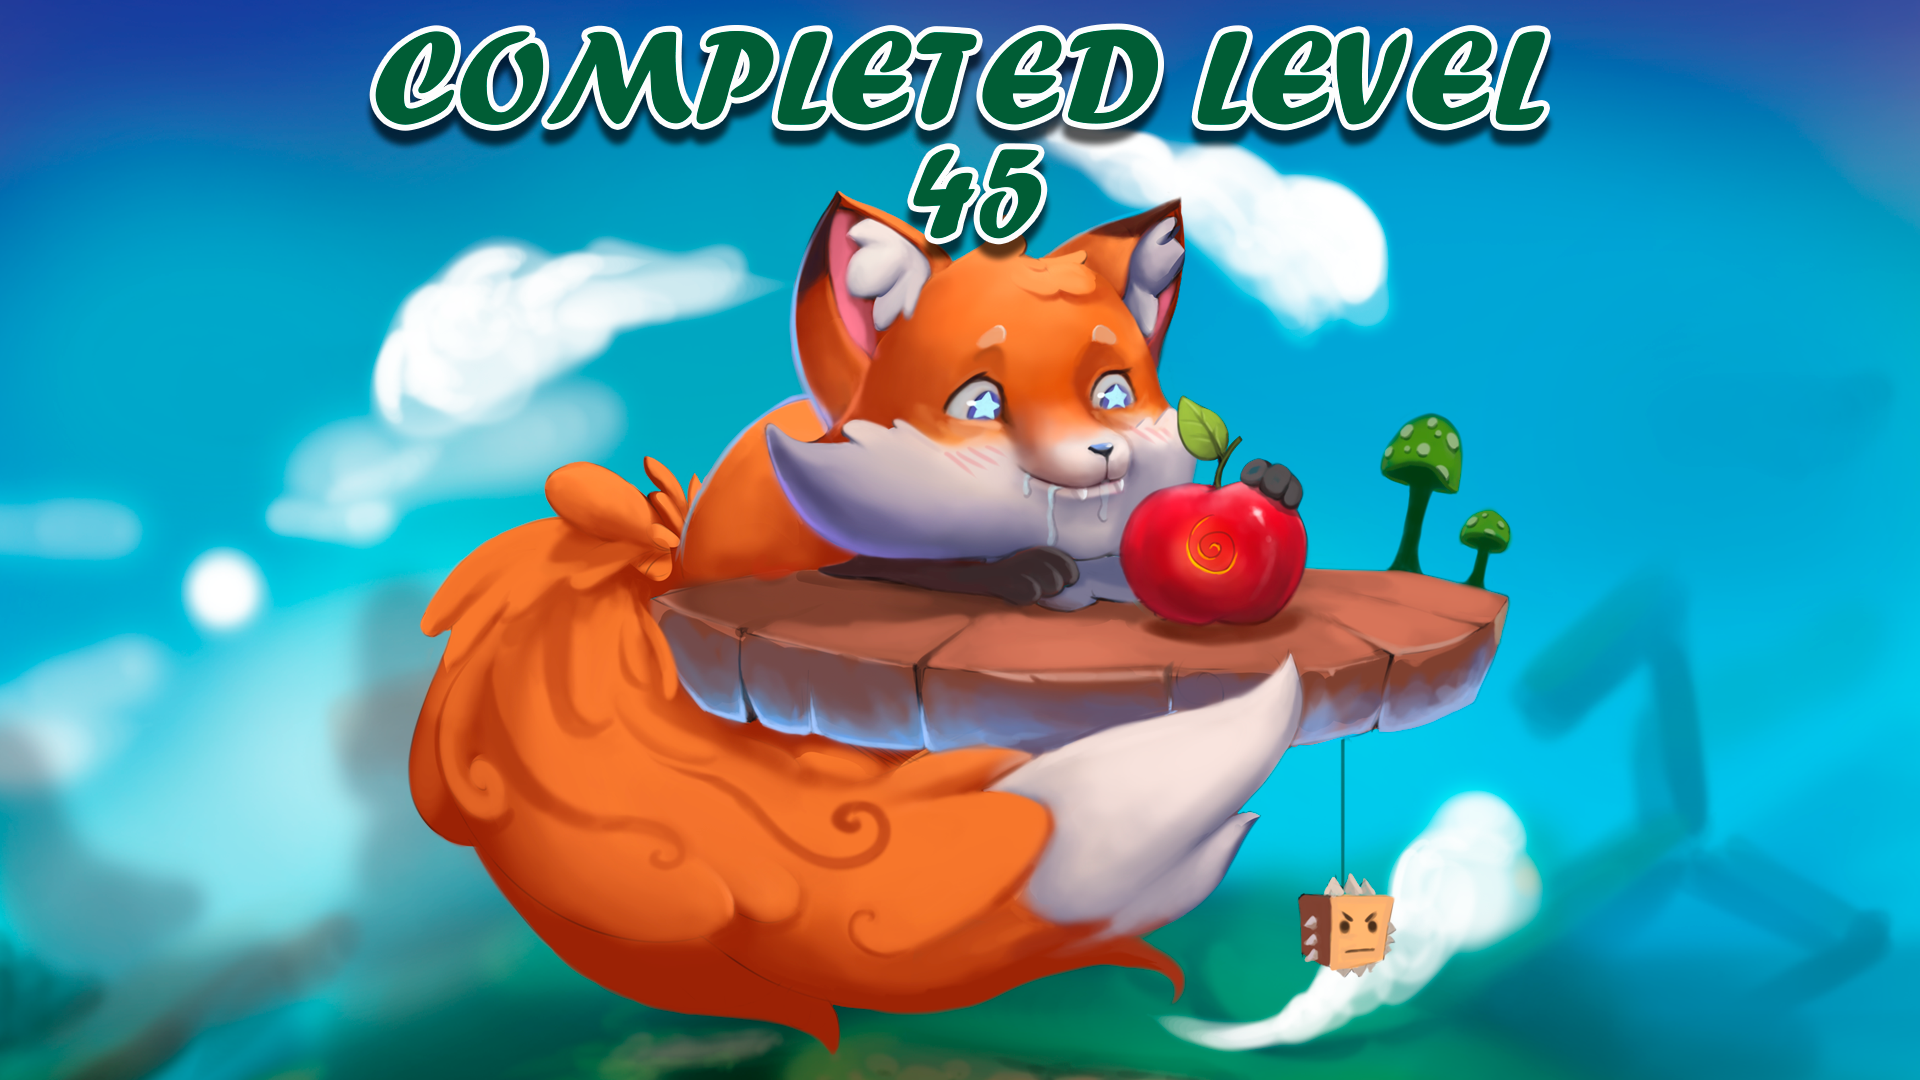 45 levels completed